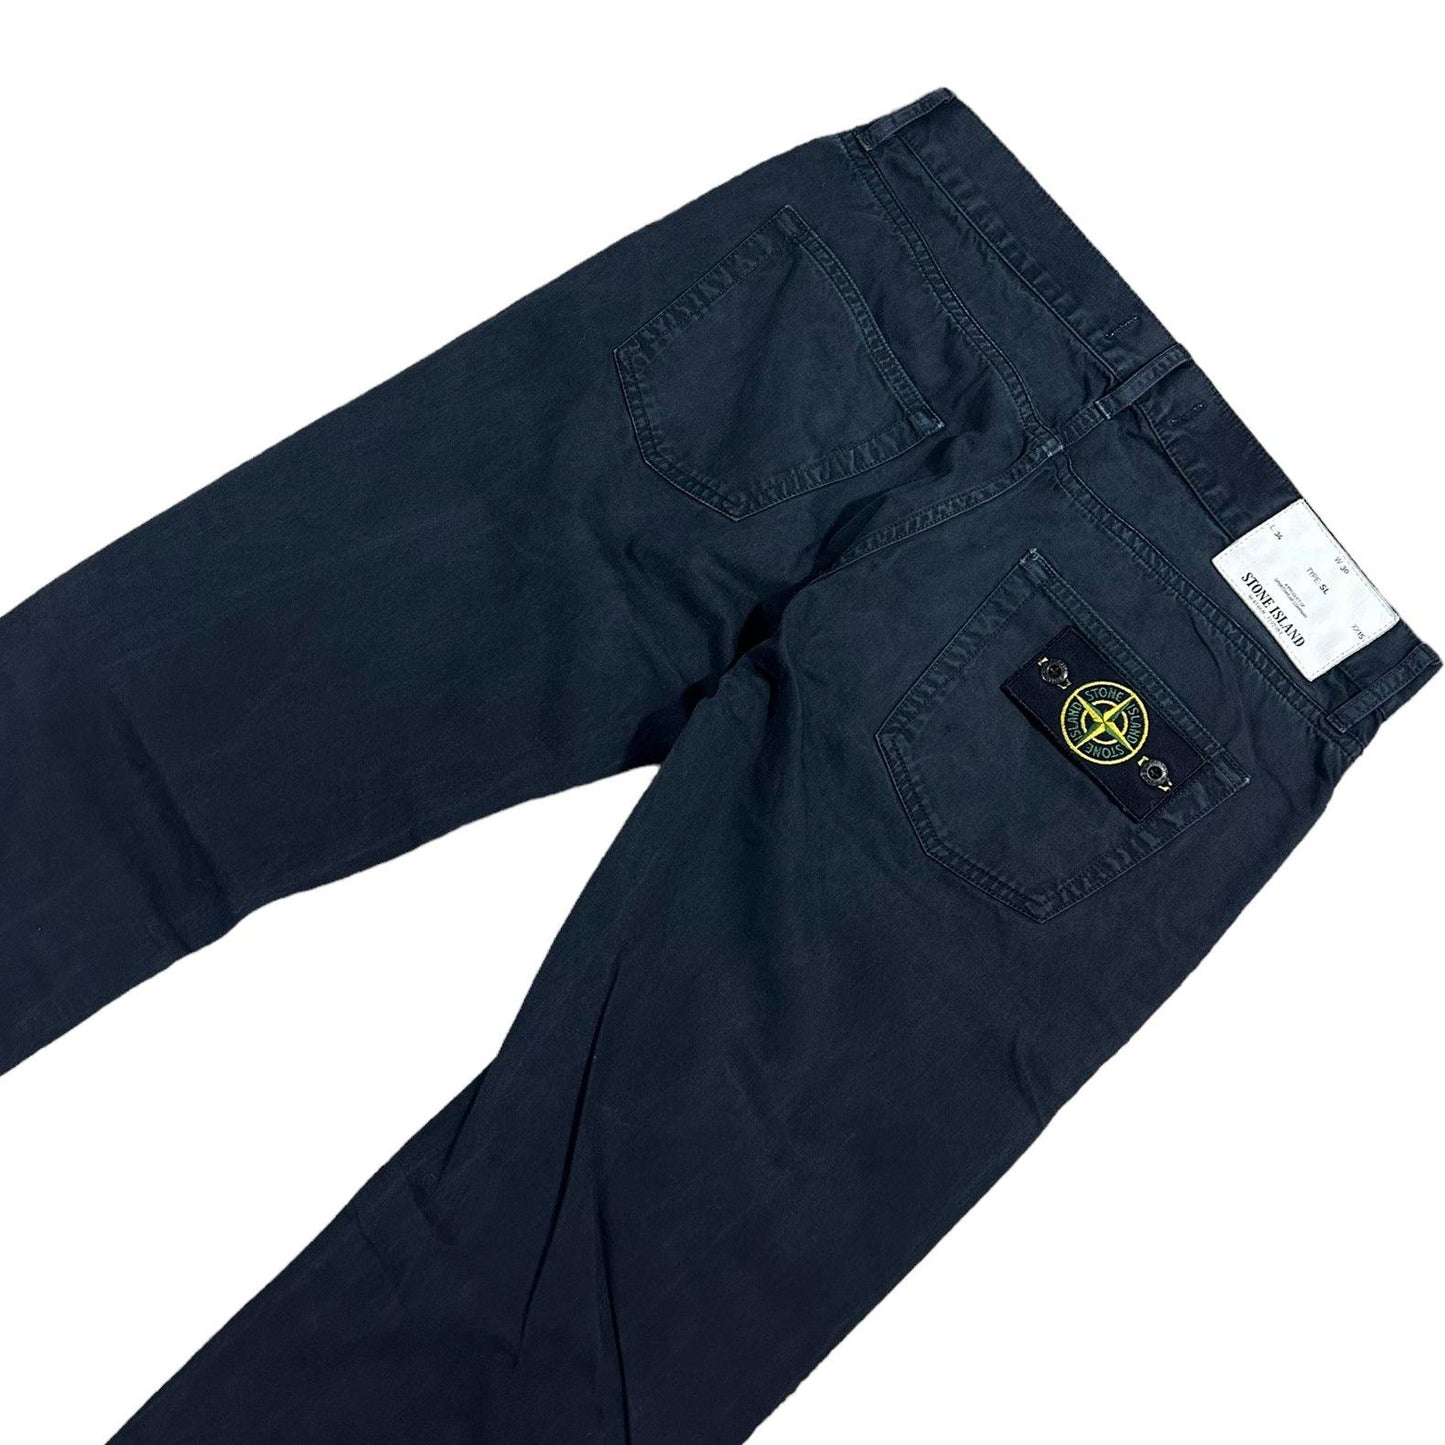 Stone Island Slim Fit Chino Bottoms - Known Source